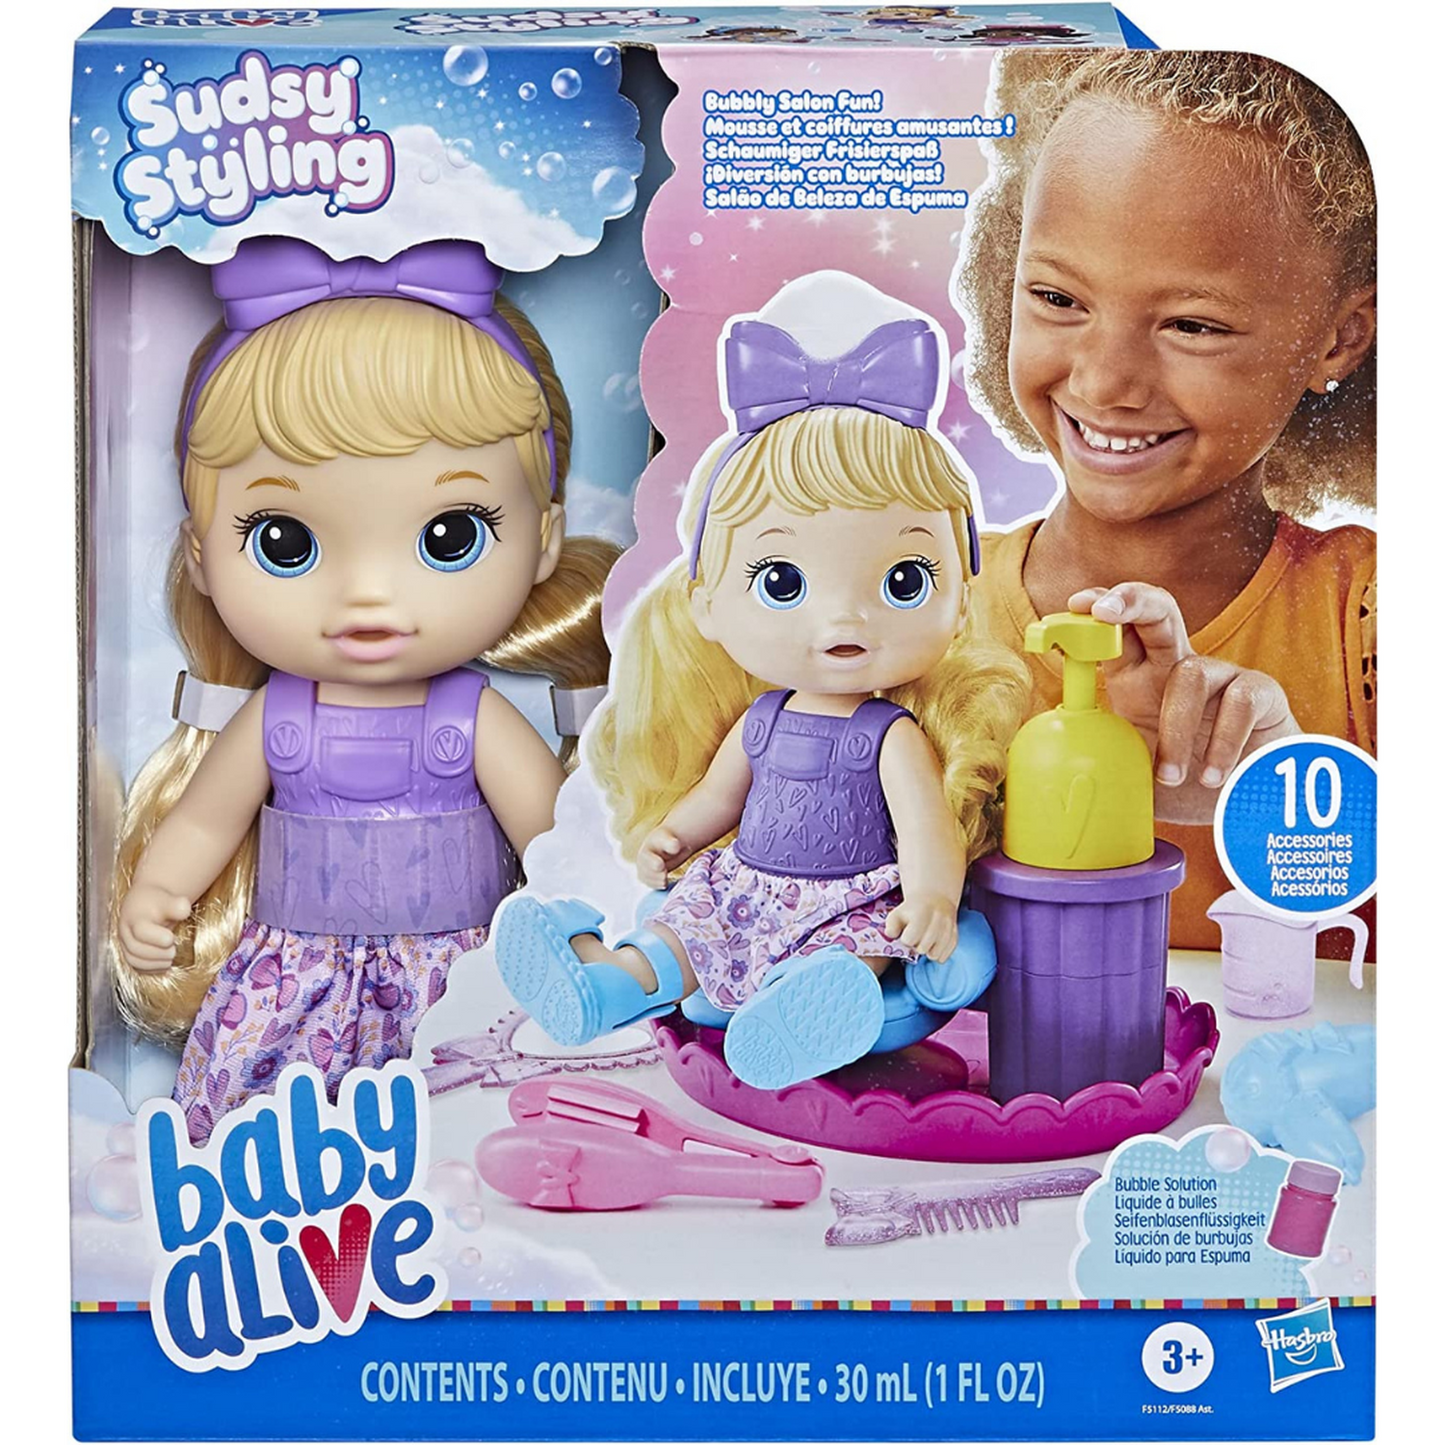 Baby Alive Sudsy Styling